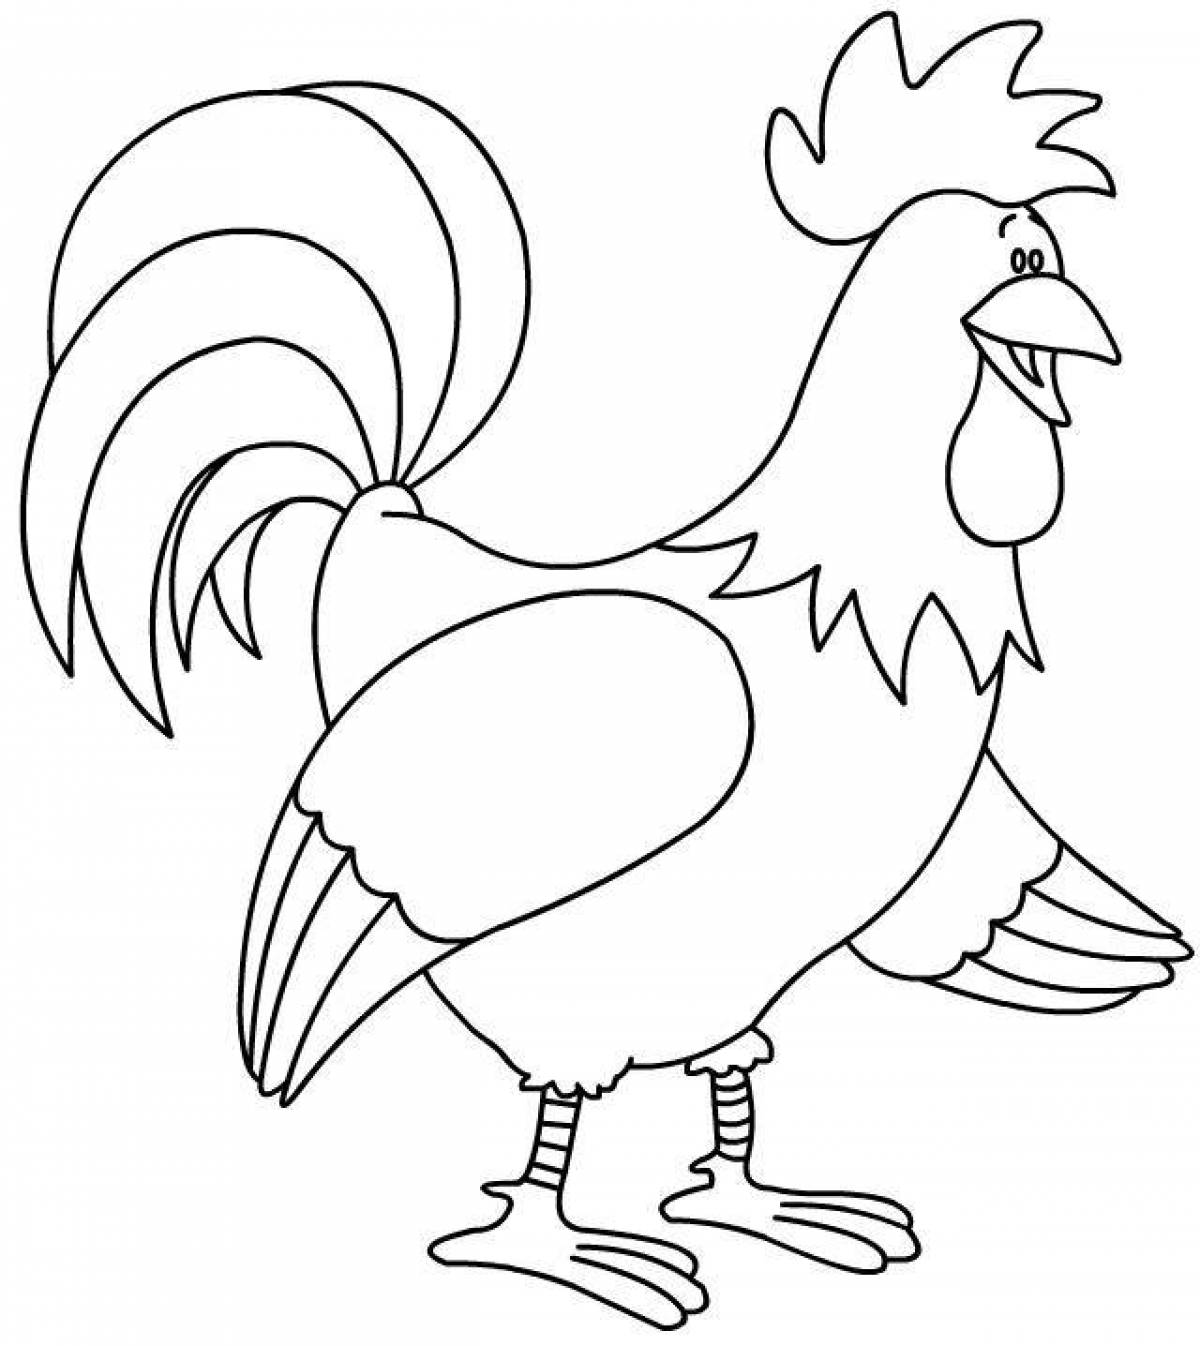 Adorable rooster coloring page for kids